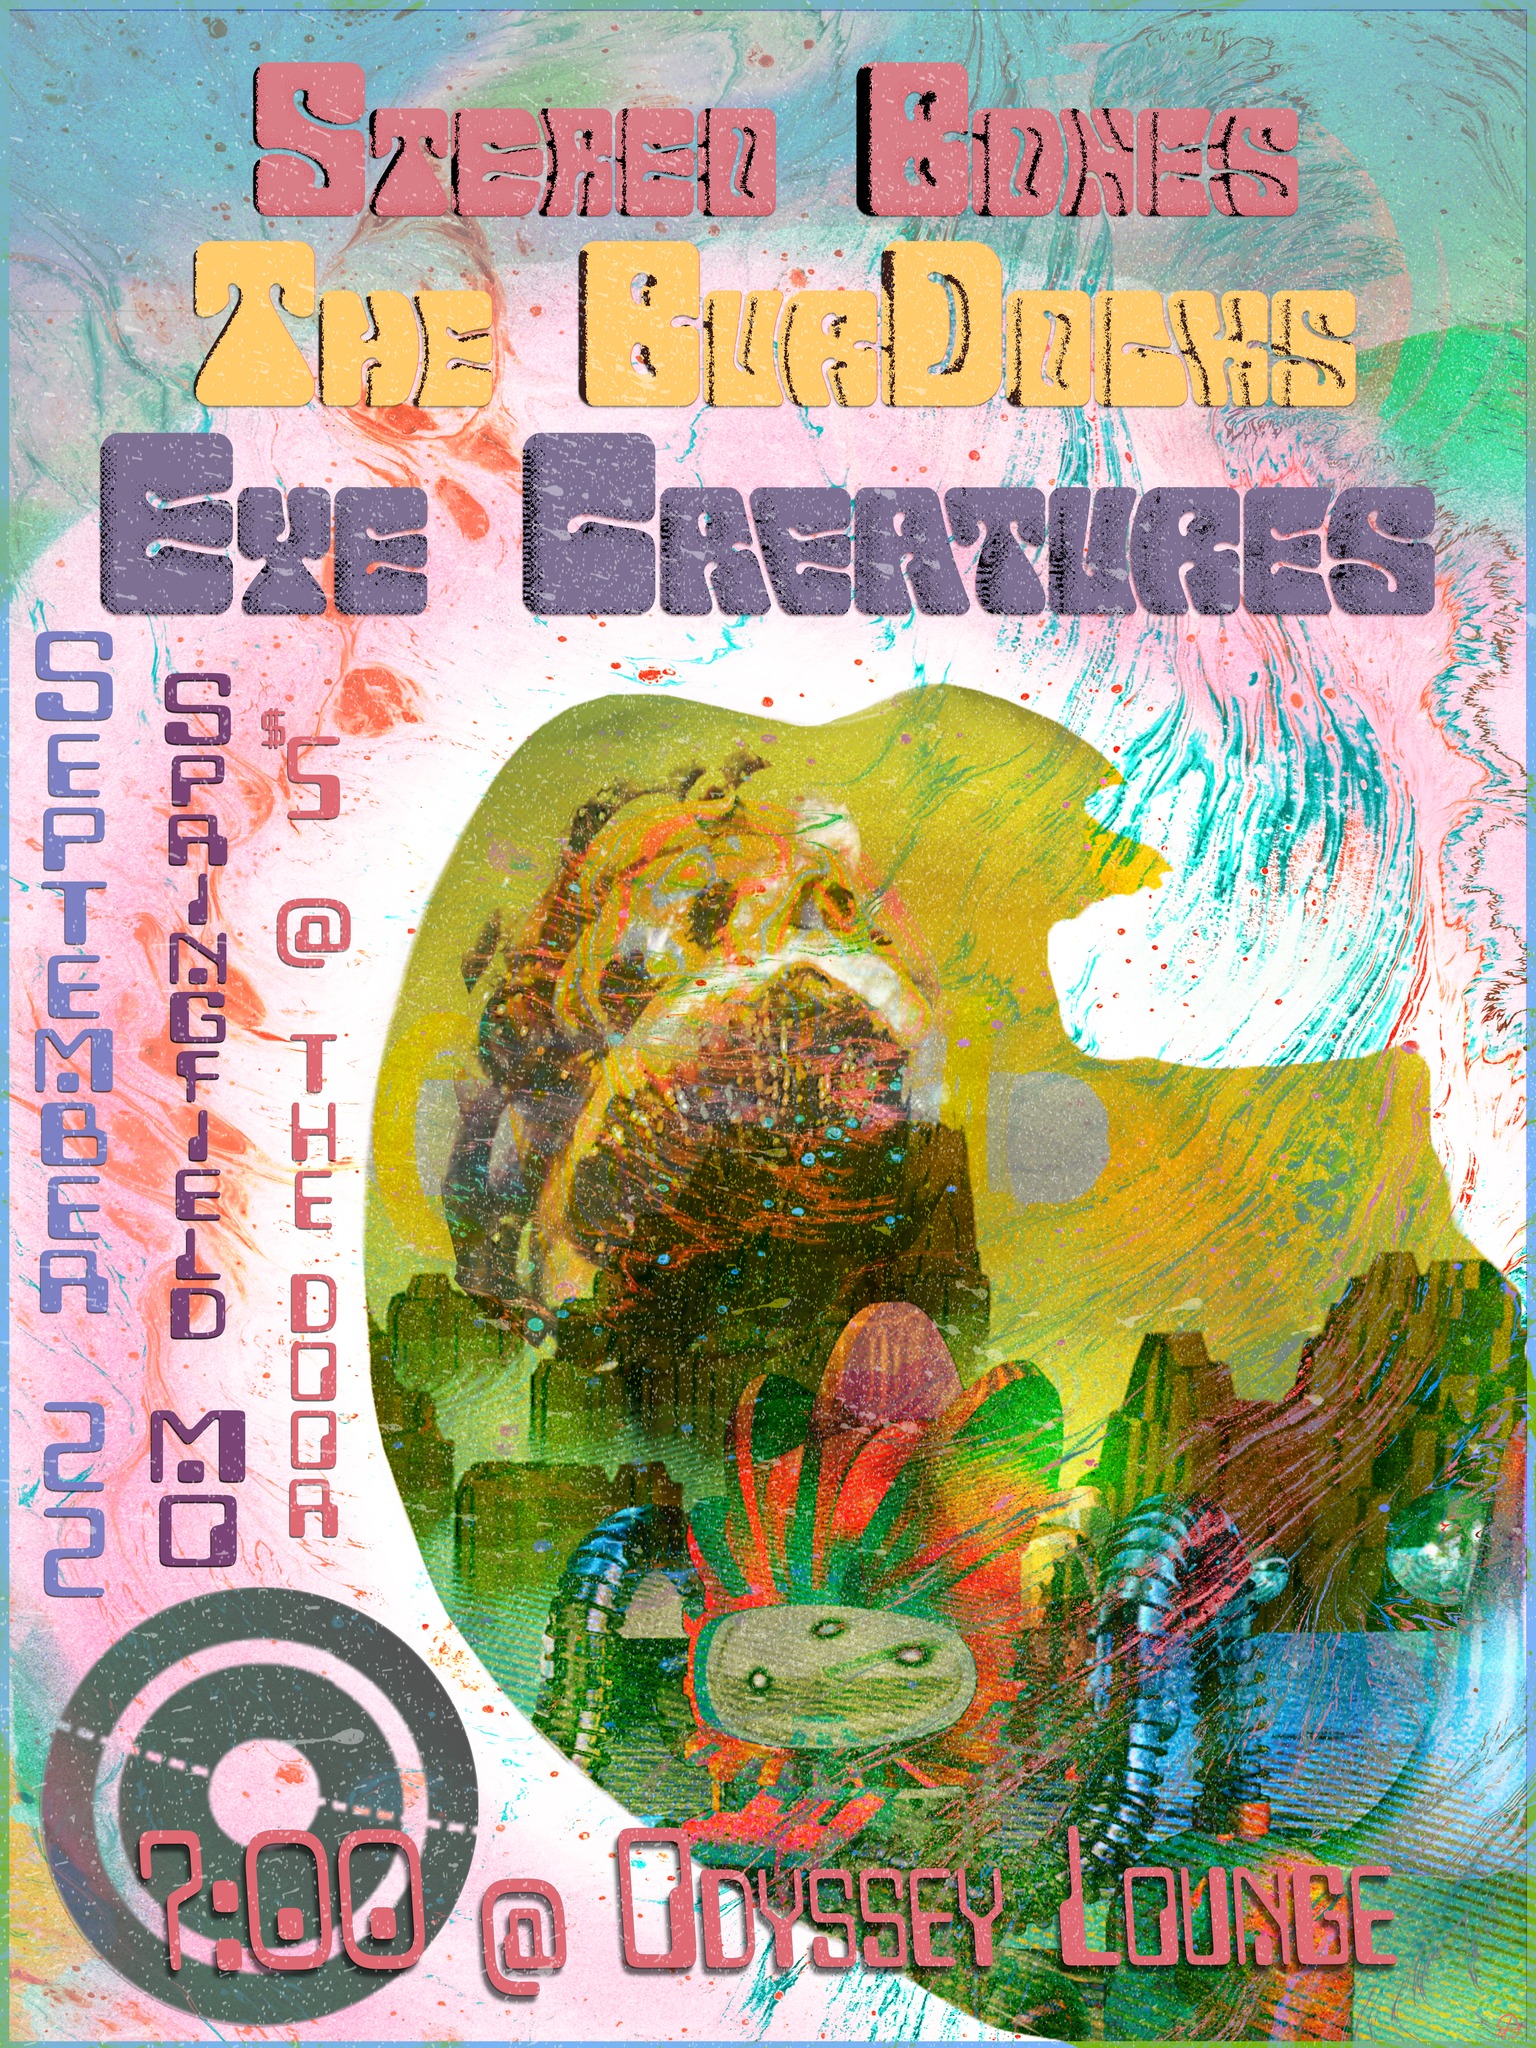 Eye Creatures, Stereo Bones and The BurDocks at The Odyssey